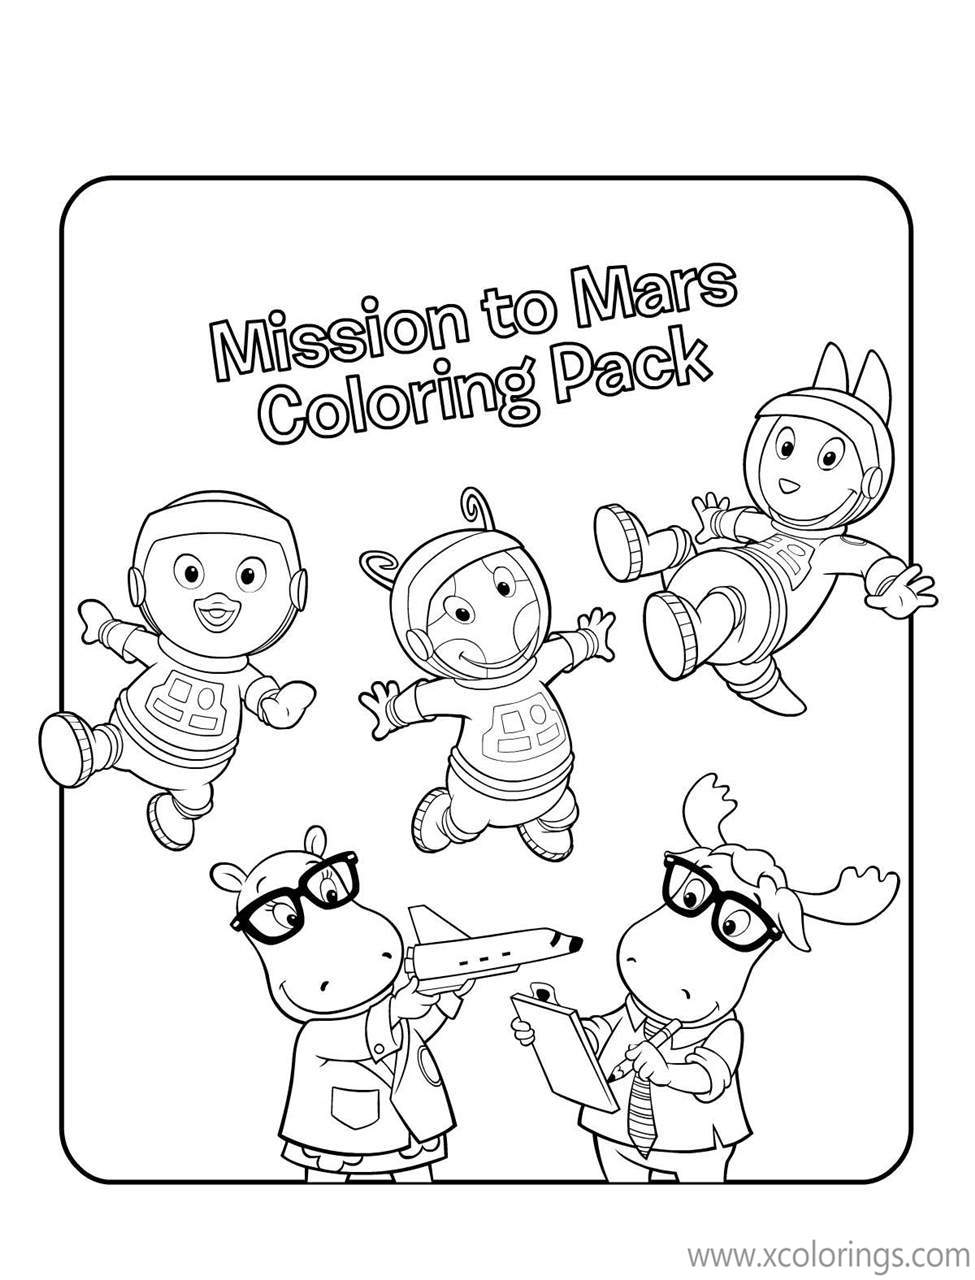 Free Backyardigans Coloring Pages Characters printable